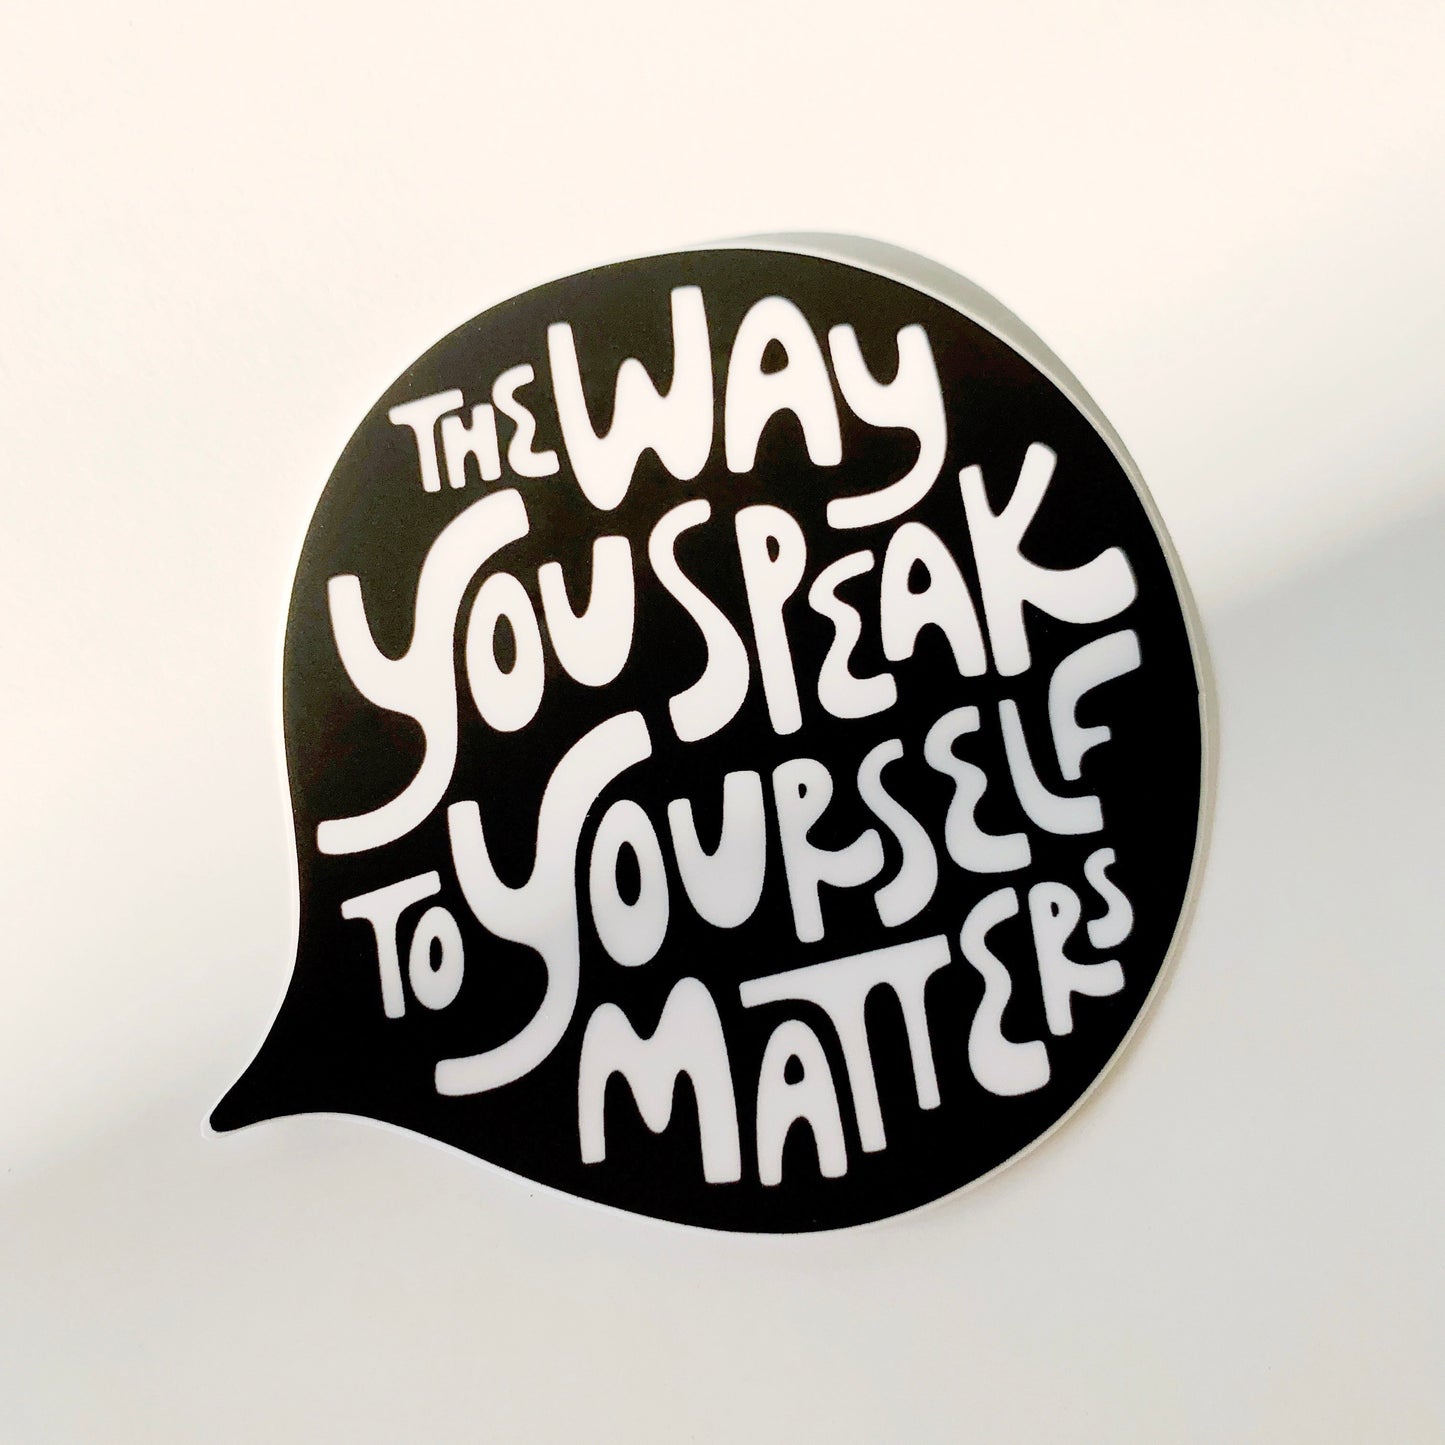 The Way You Speak to Yourself Matters Sticker